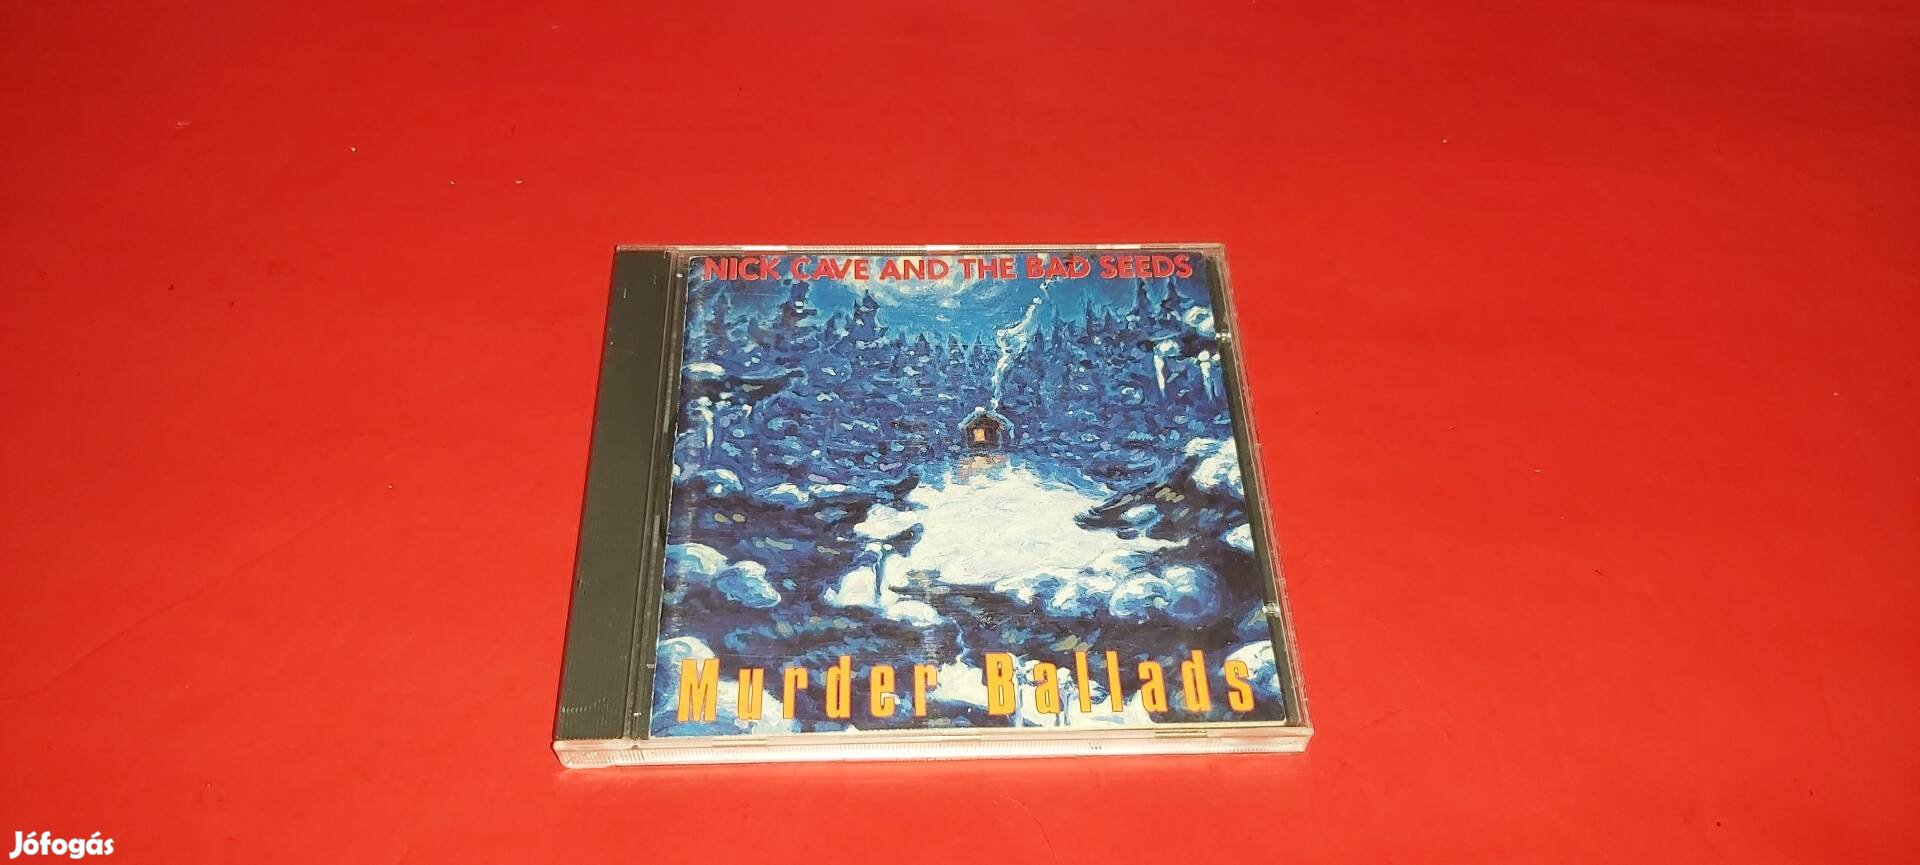 Nick Cave and the Bad Seeds Murder ballads Cd 1996